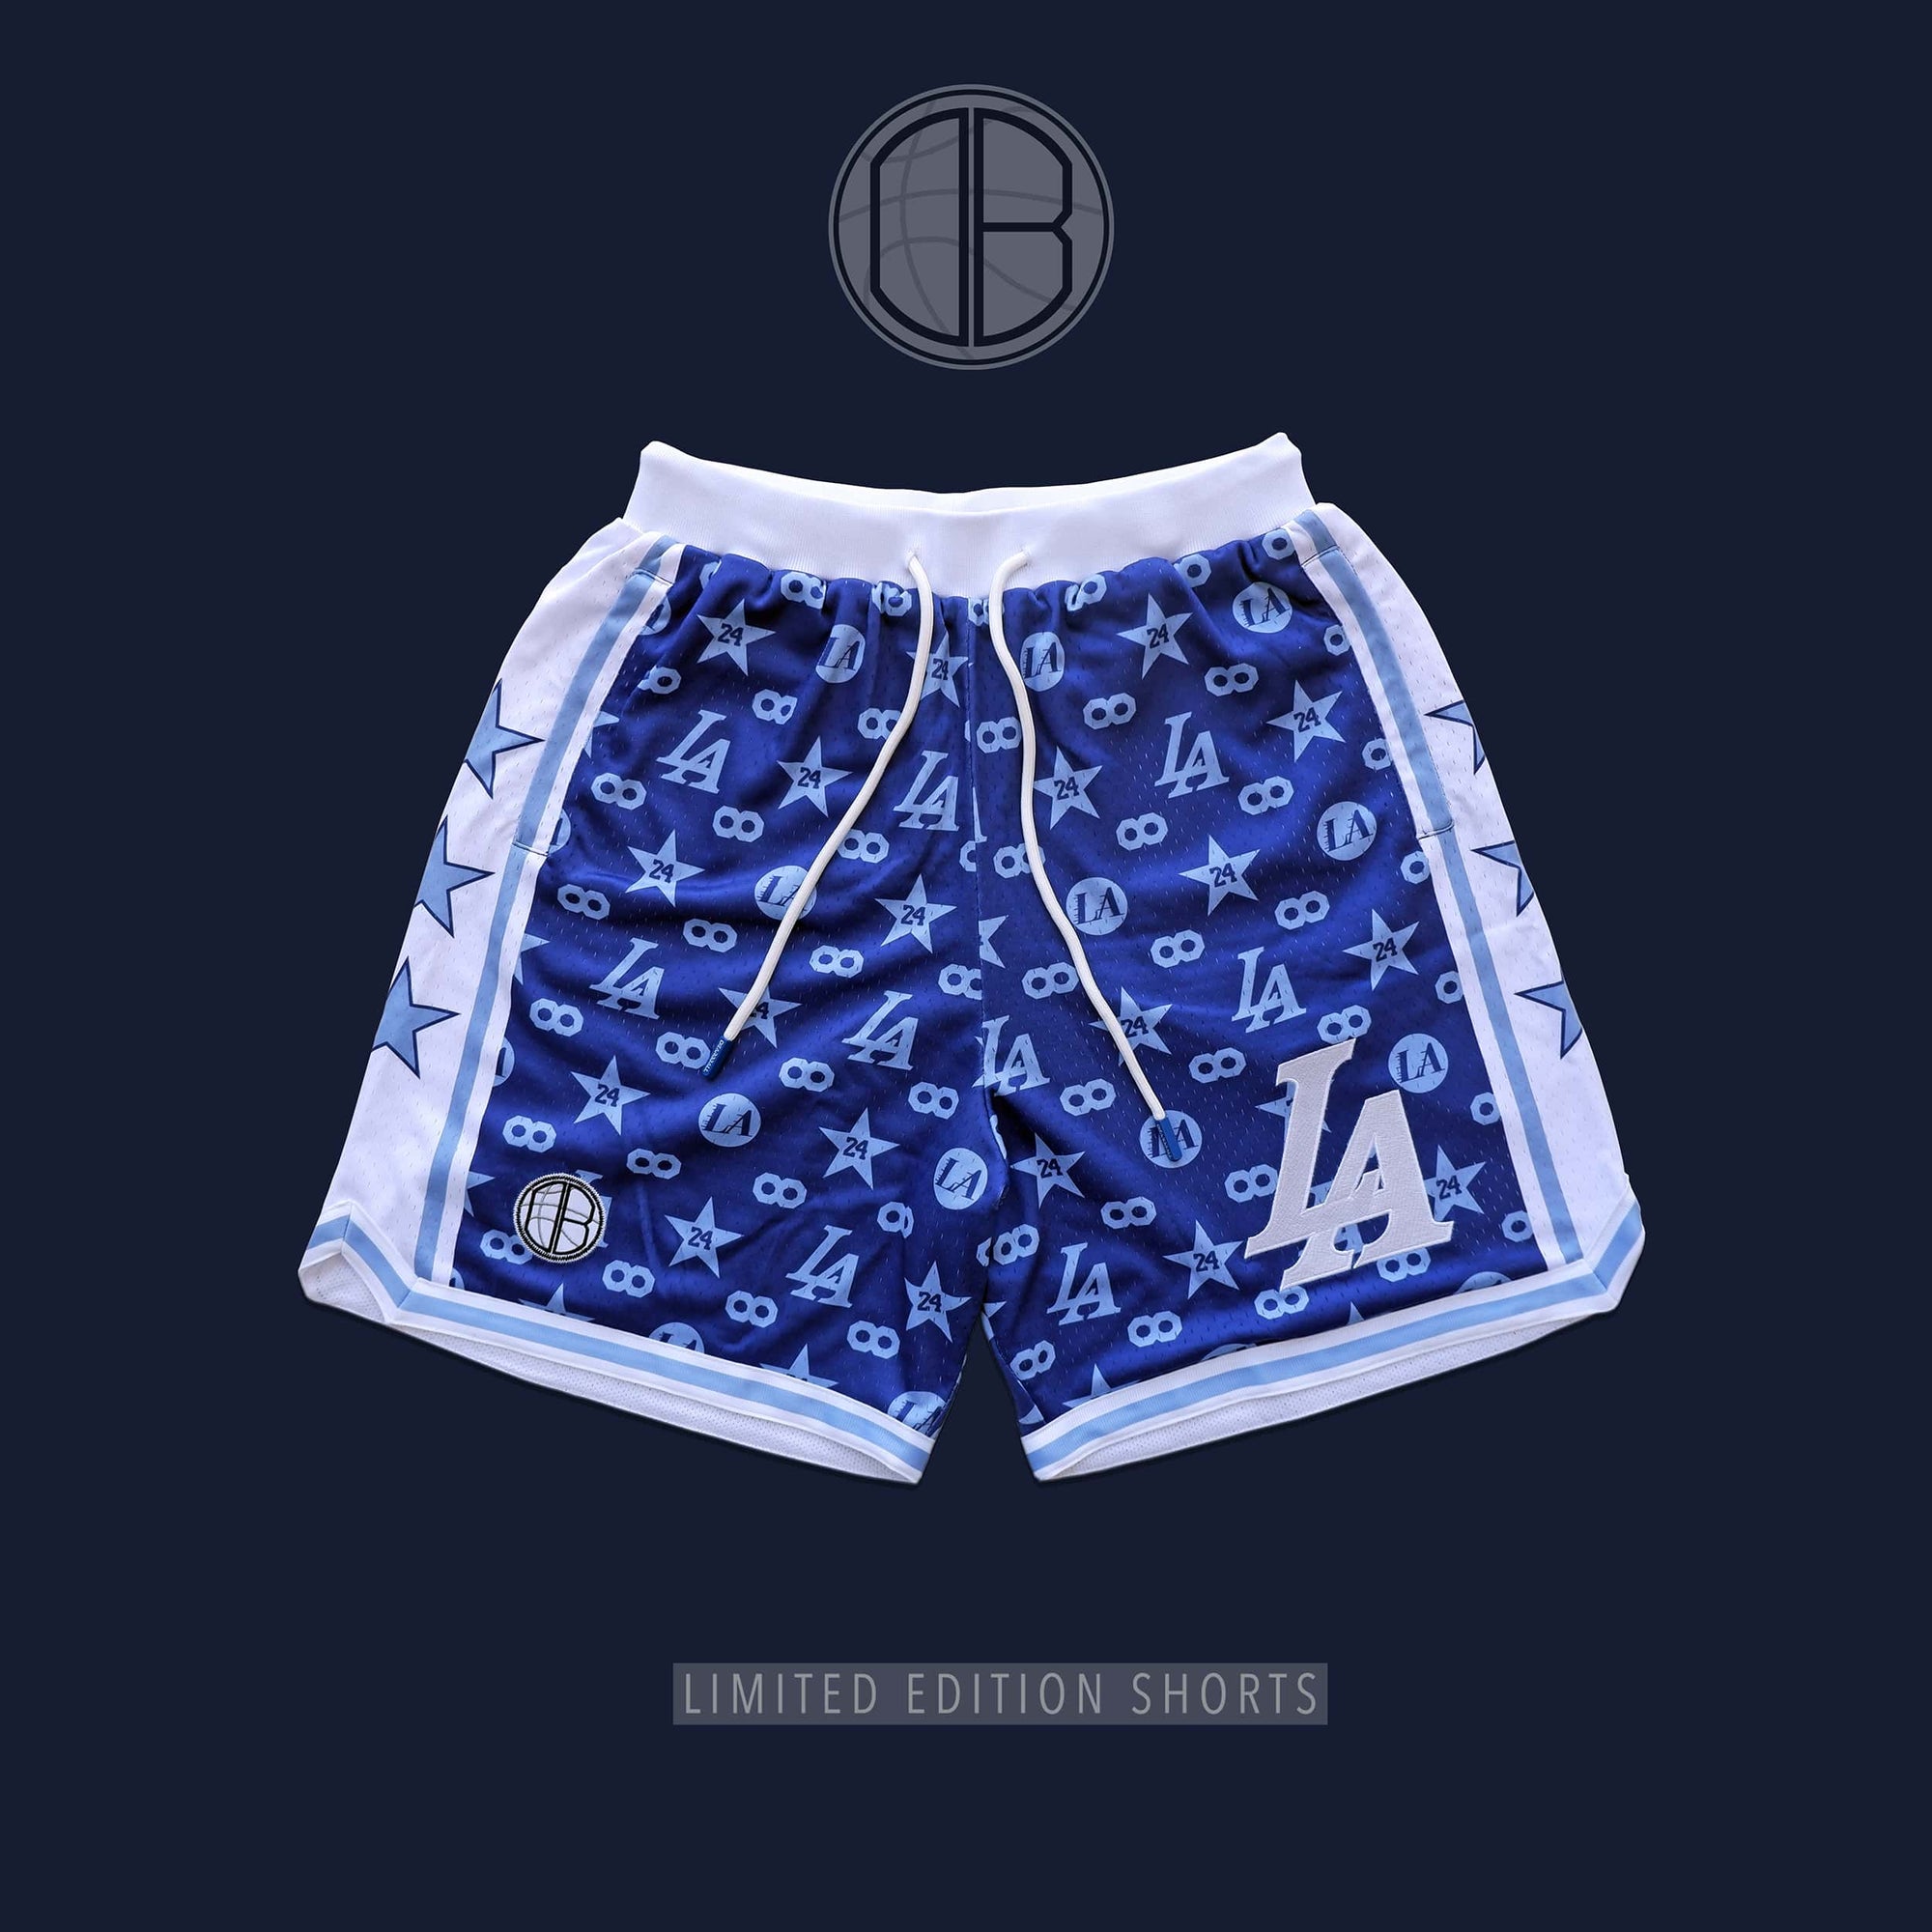 DEARBBALL SHORTS MESH LOS ANGELES - LA 24 8 INFINITY LIMITED EDITION ♾️